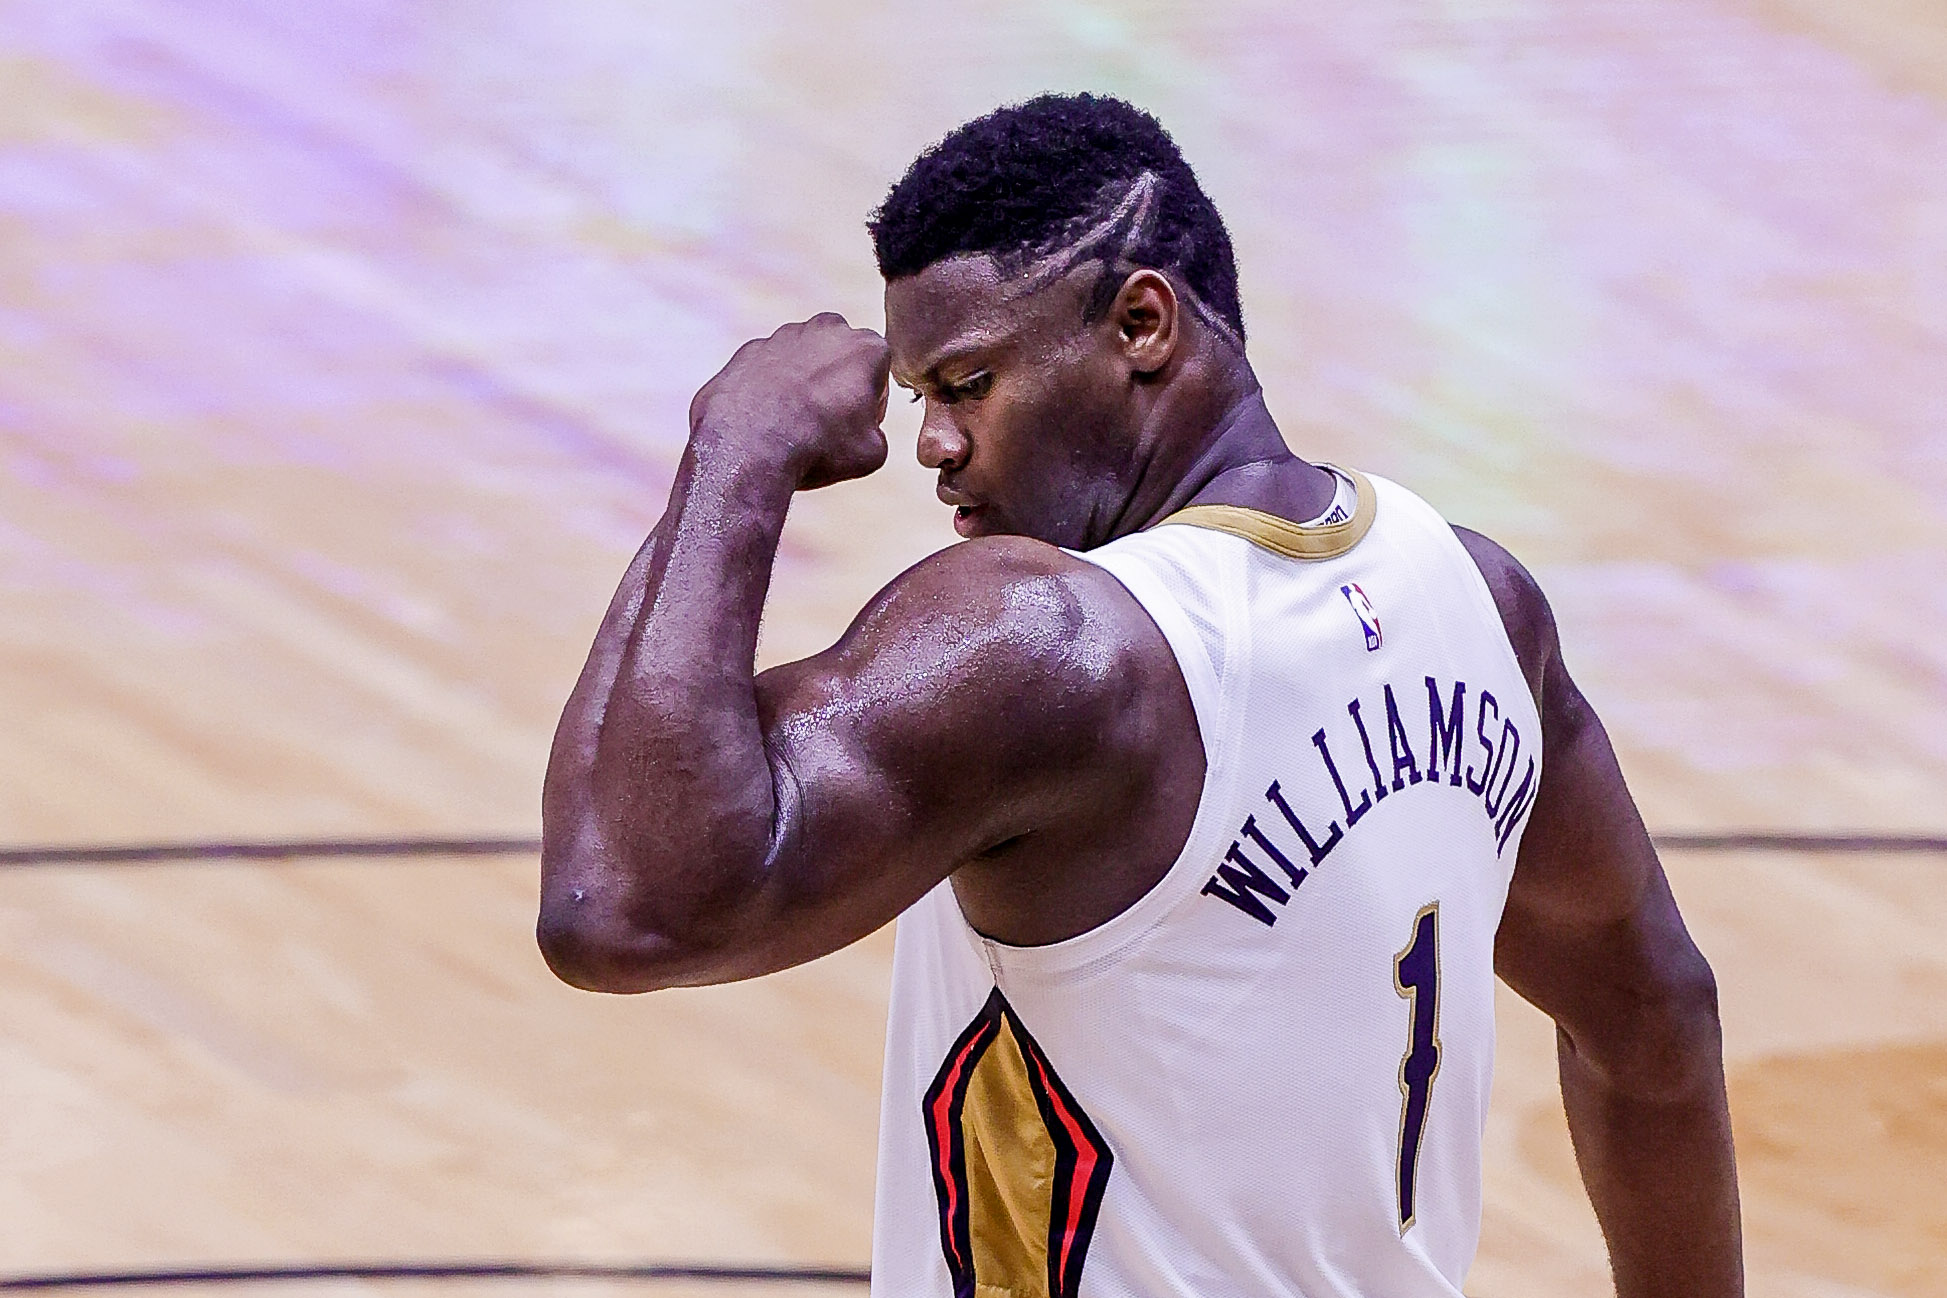 New Orleans Pelicans forward Zion Williamson (1) flexes his muscle after making a basket against Golden State Warriors forward Draymond Green (23) during the second half at the Smoothie King Center.